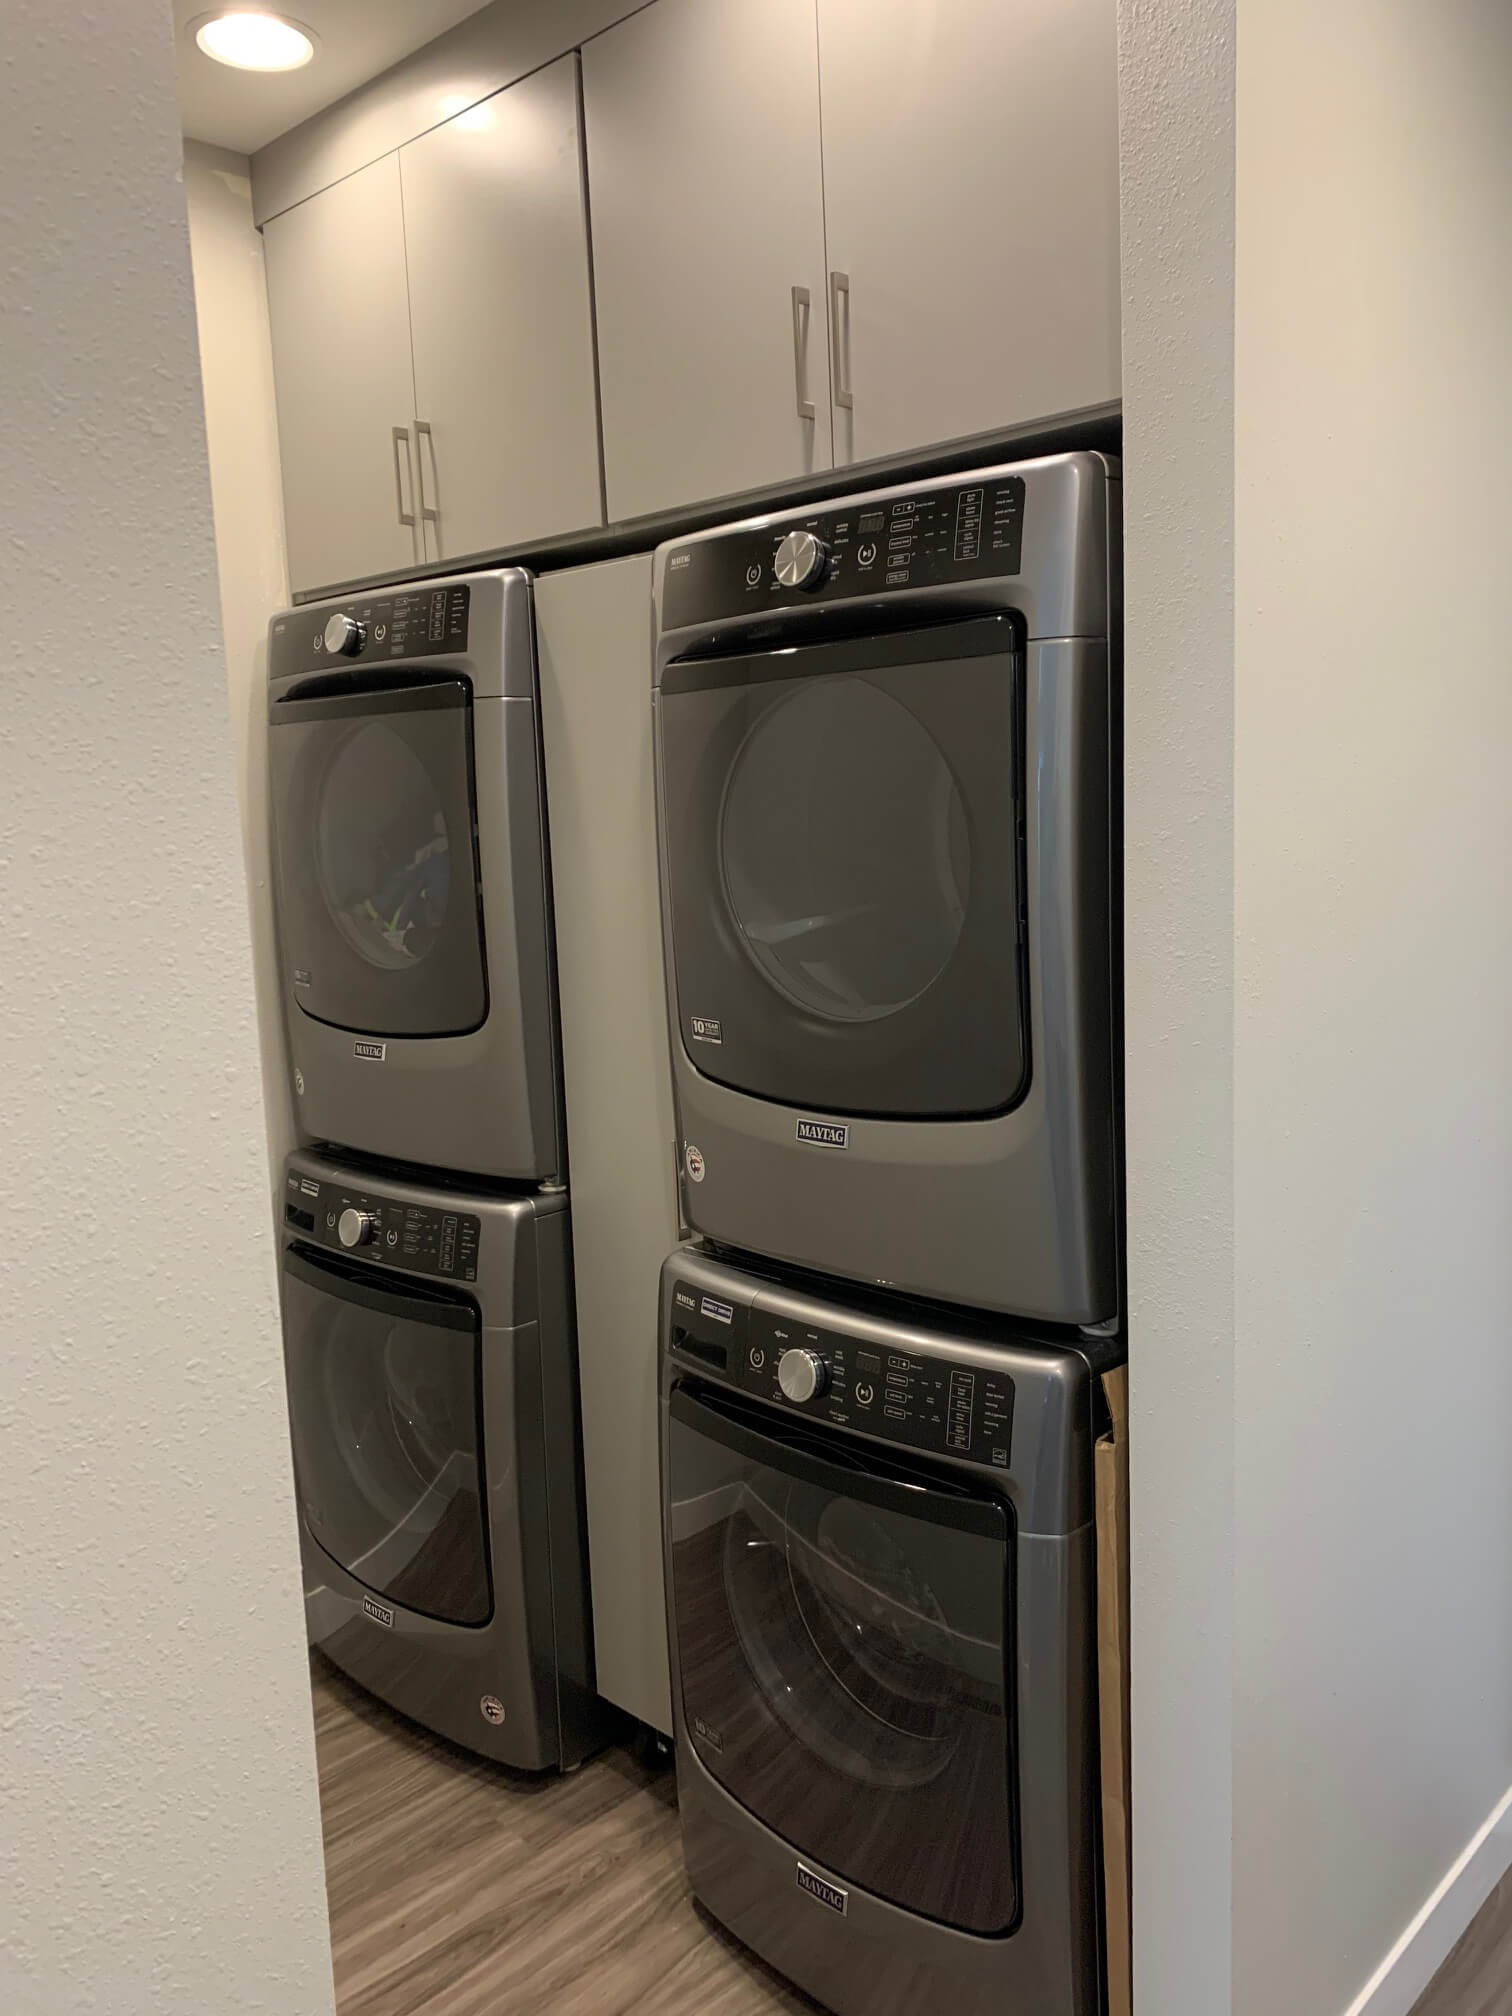 Laundry Room Organization in Sioux Falls, SD